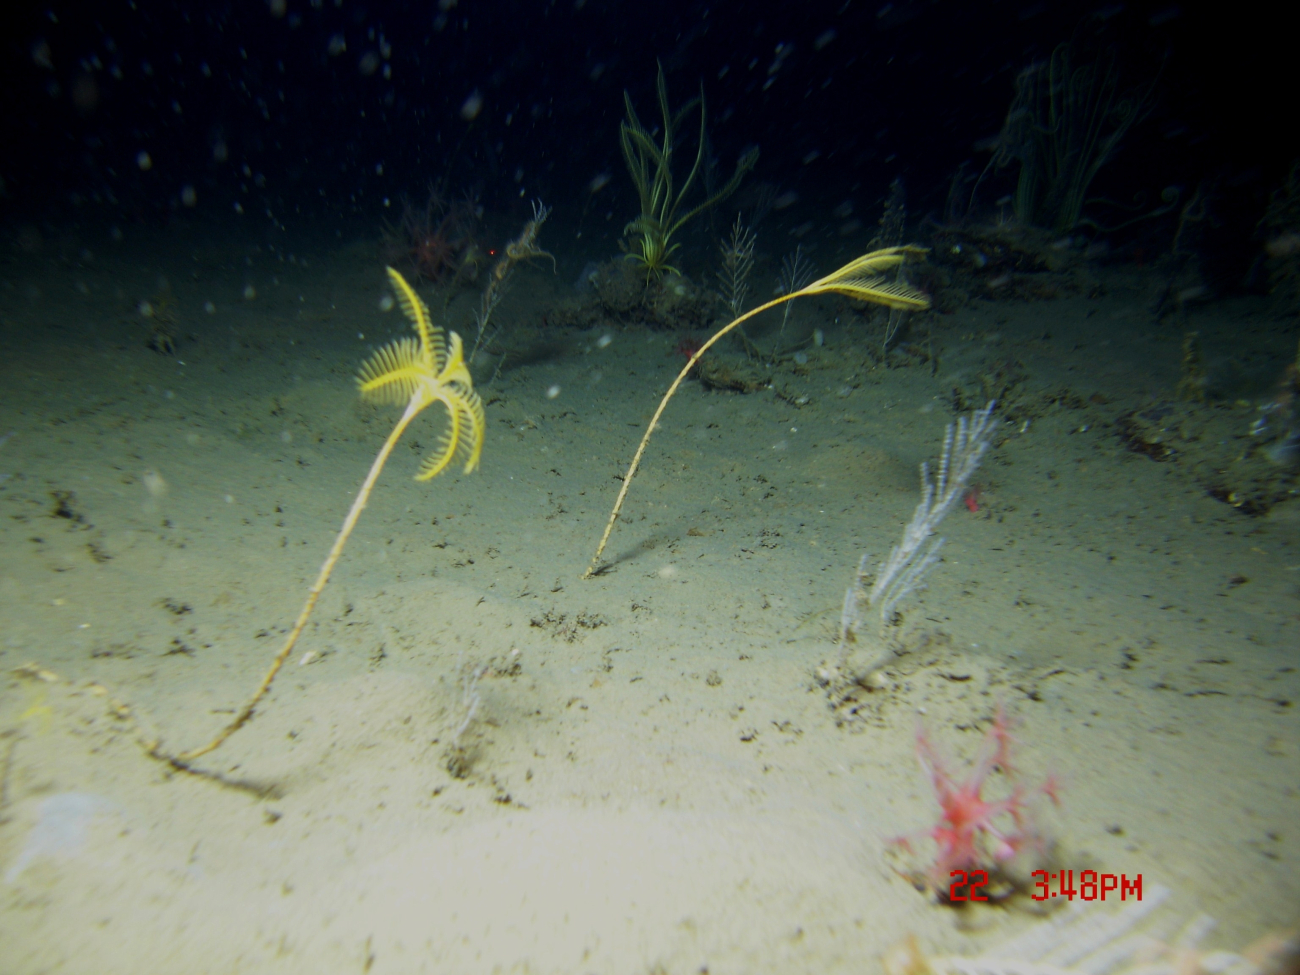 Two yellow sea lily stalked crinoids, a red anthomastus coral, small bamboocorals, and a yellow feather star crinoid in the background